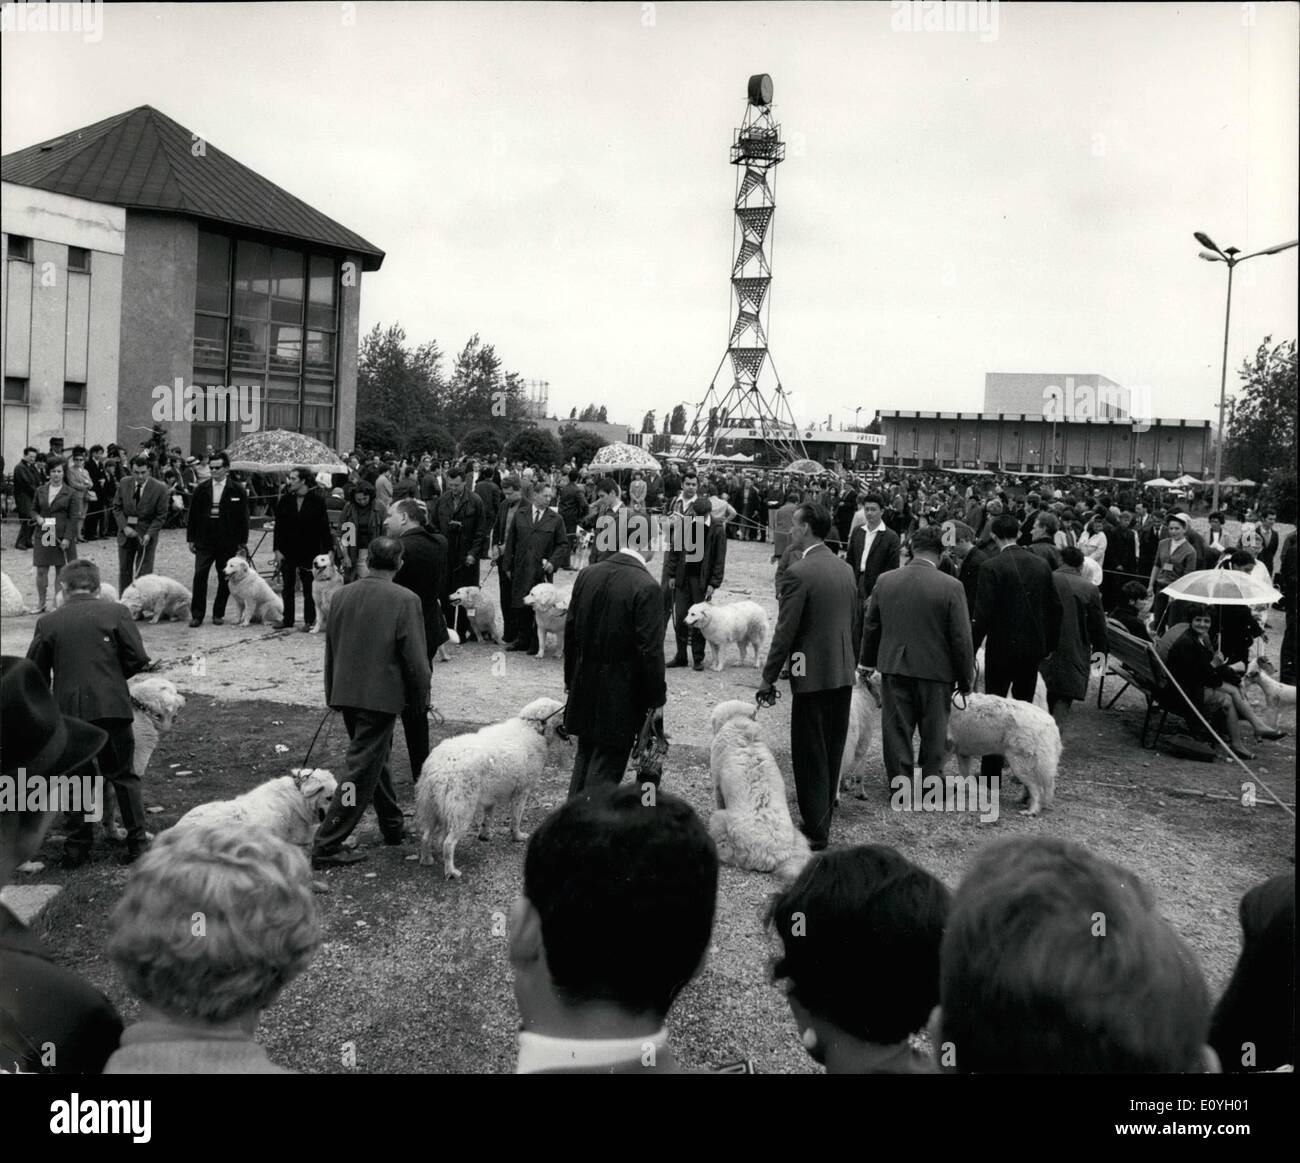 May 05, 1970 - International Dog Show in Budapest: The largest international dog show in Europe was held in Budapest on May 9 and 10 on the Agricultural Fairground. During the two day show 2,404 dogs of 80 breeds were judged. The owners of Hungarian ''Invasz'' dogs lining up with their pets for judging. Stock Photo